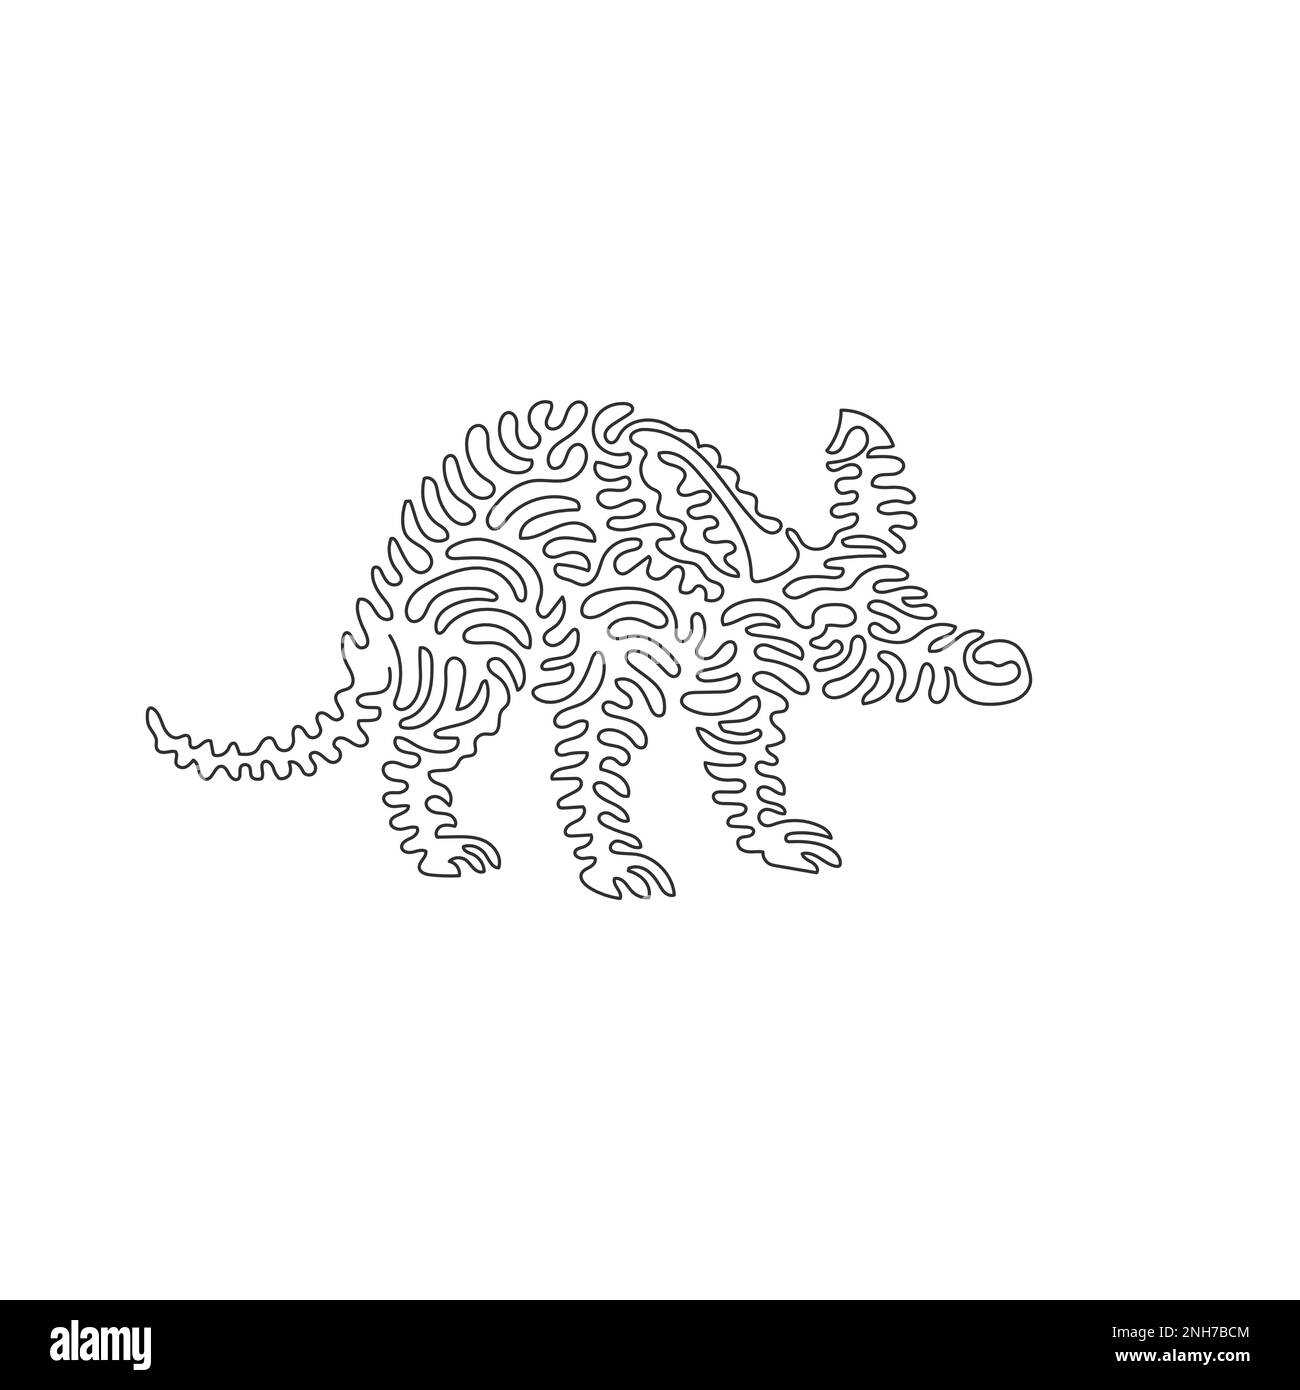 Continuous one line drawing of cute aardvark curve abstract art. Single line editable stroke vector illustration of elongated snout aardvark Stock Vector